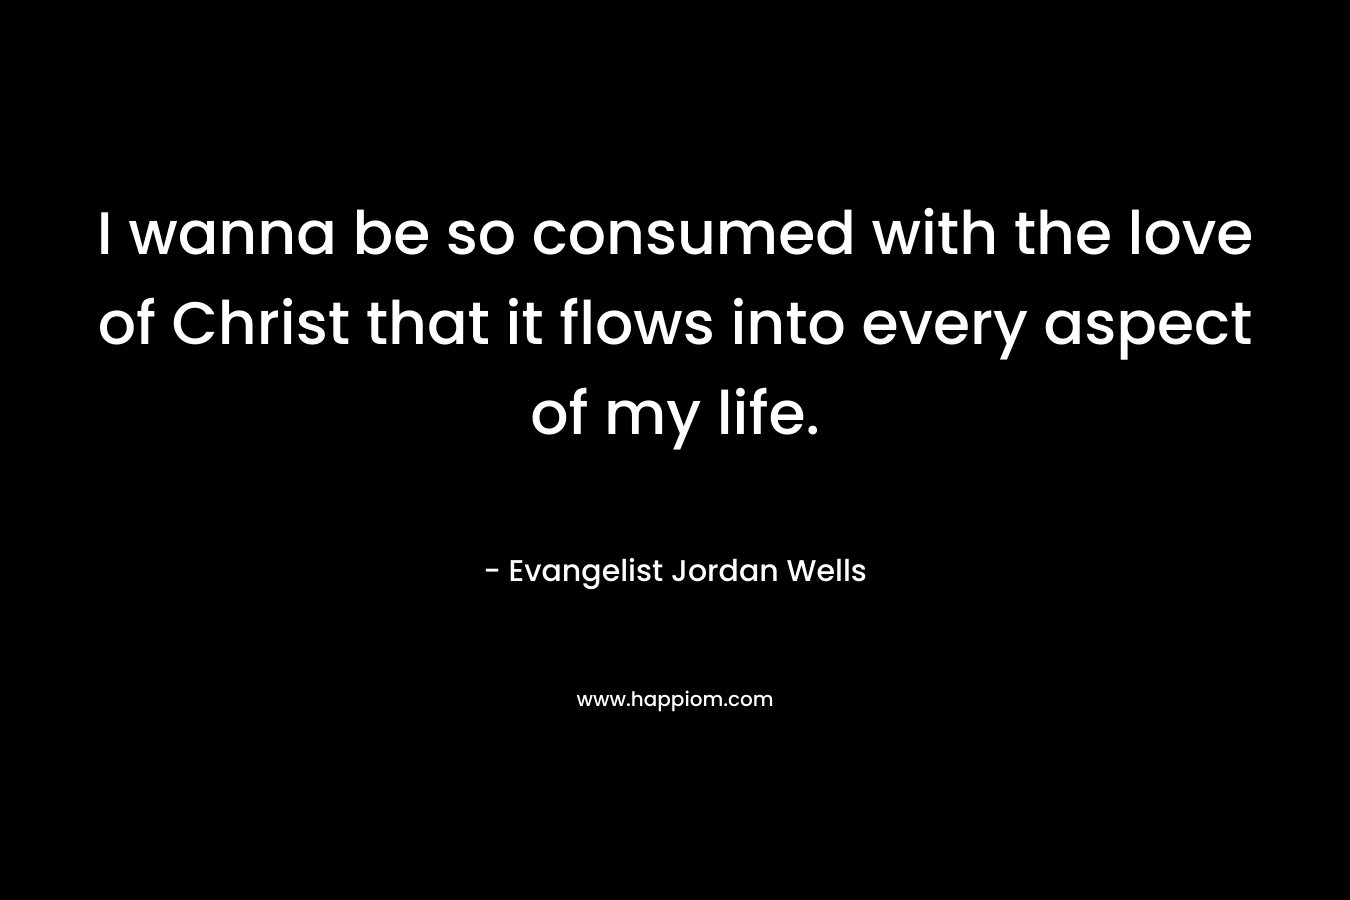 I wanna be so consumed with the love of Christ that it flows into every aspect of my life. – Evangelist Jordan Wells